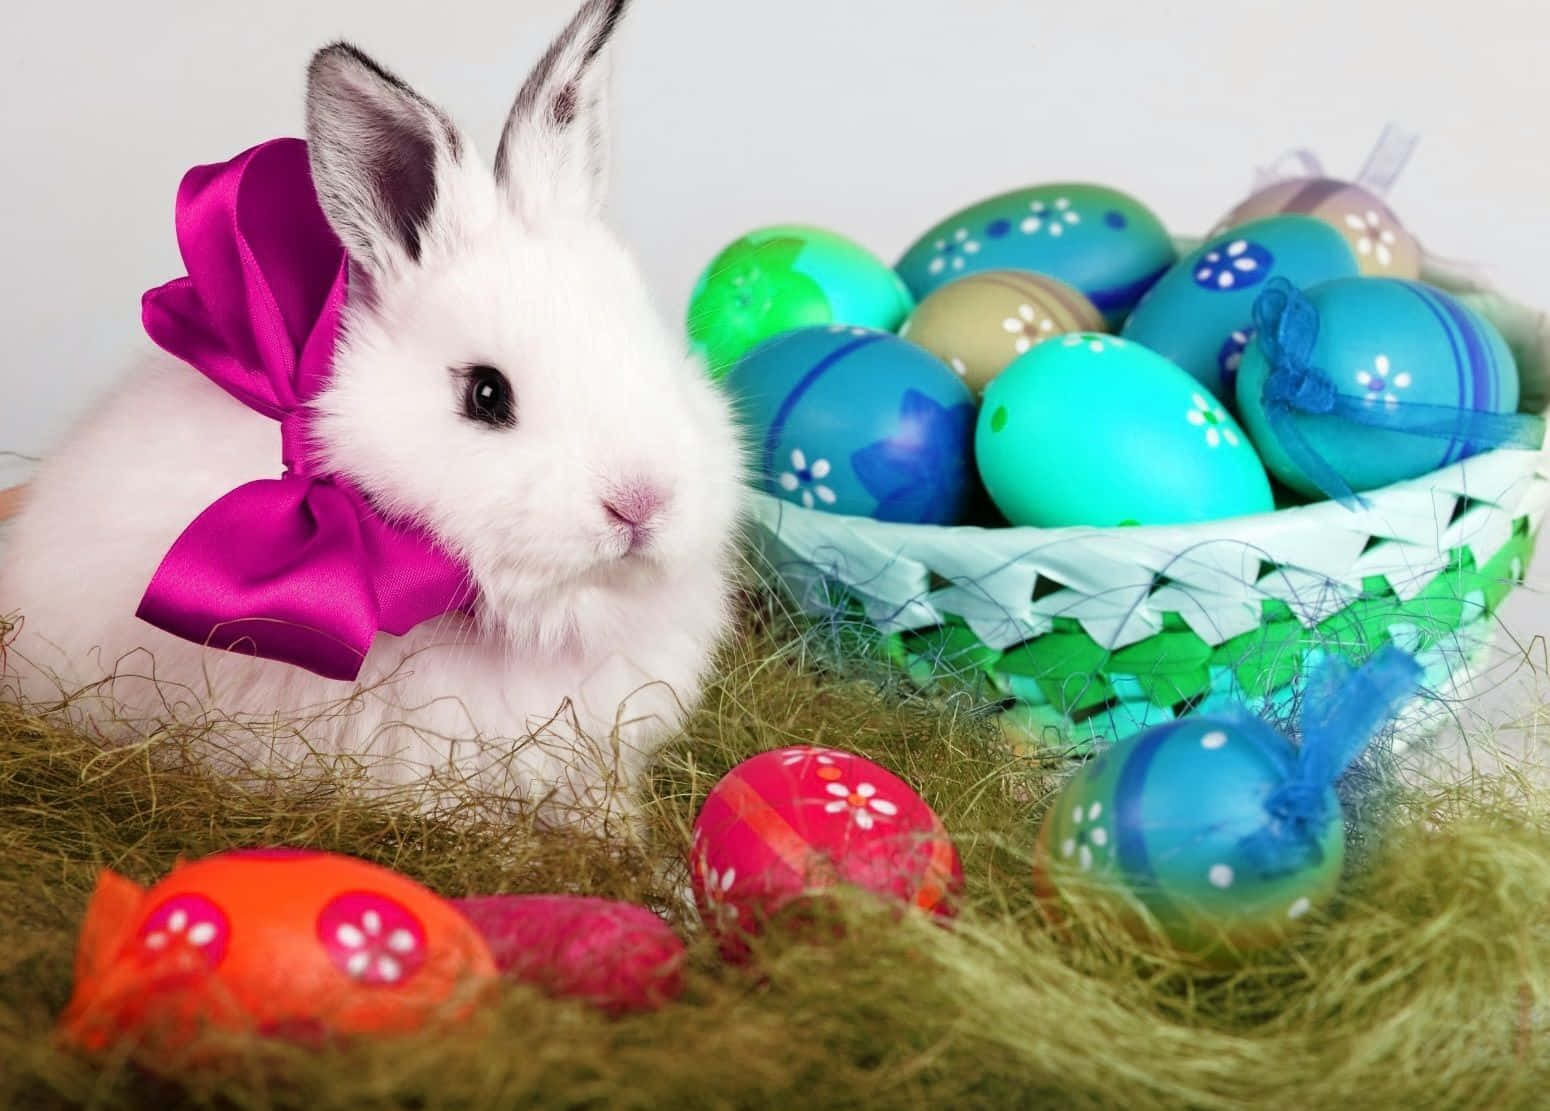 Caption: Adorable Easter Bunny On Spring Background